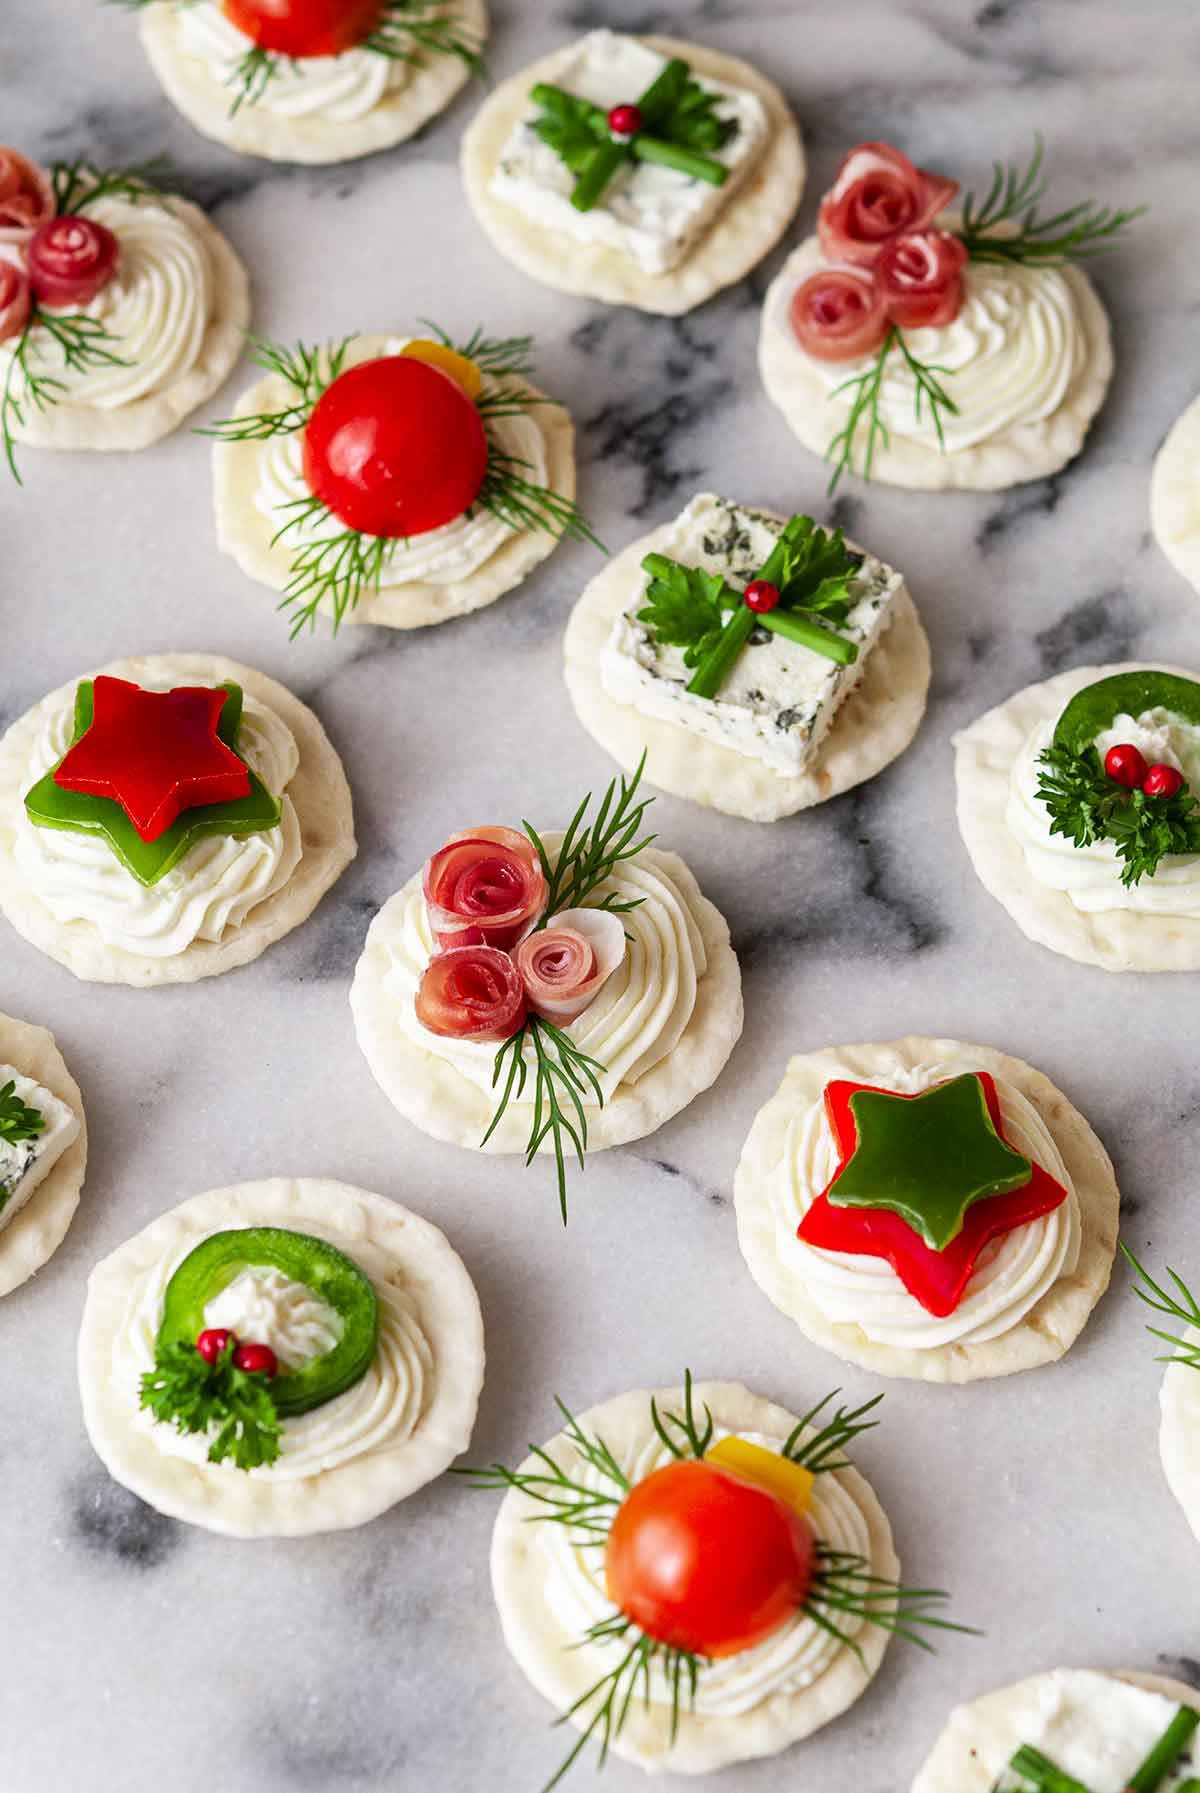 An assortment of 14 holiday-themed appetizers on marble..